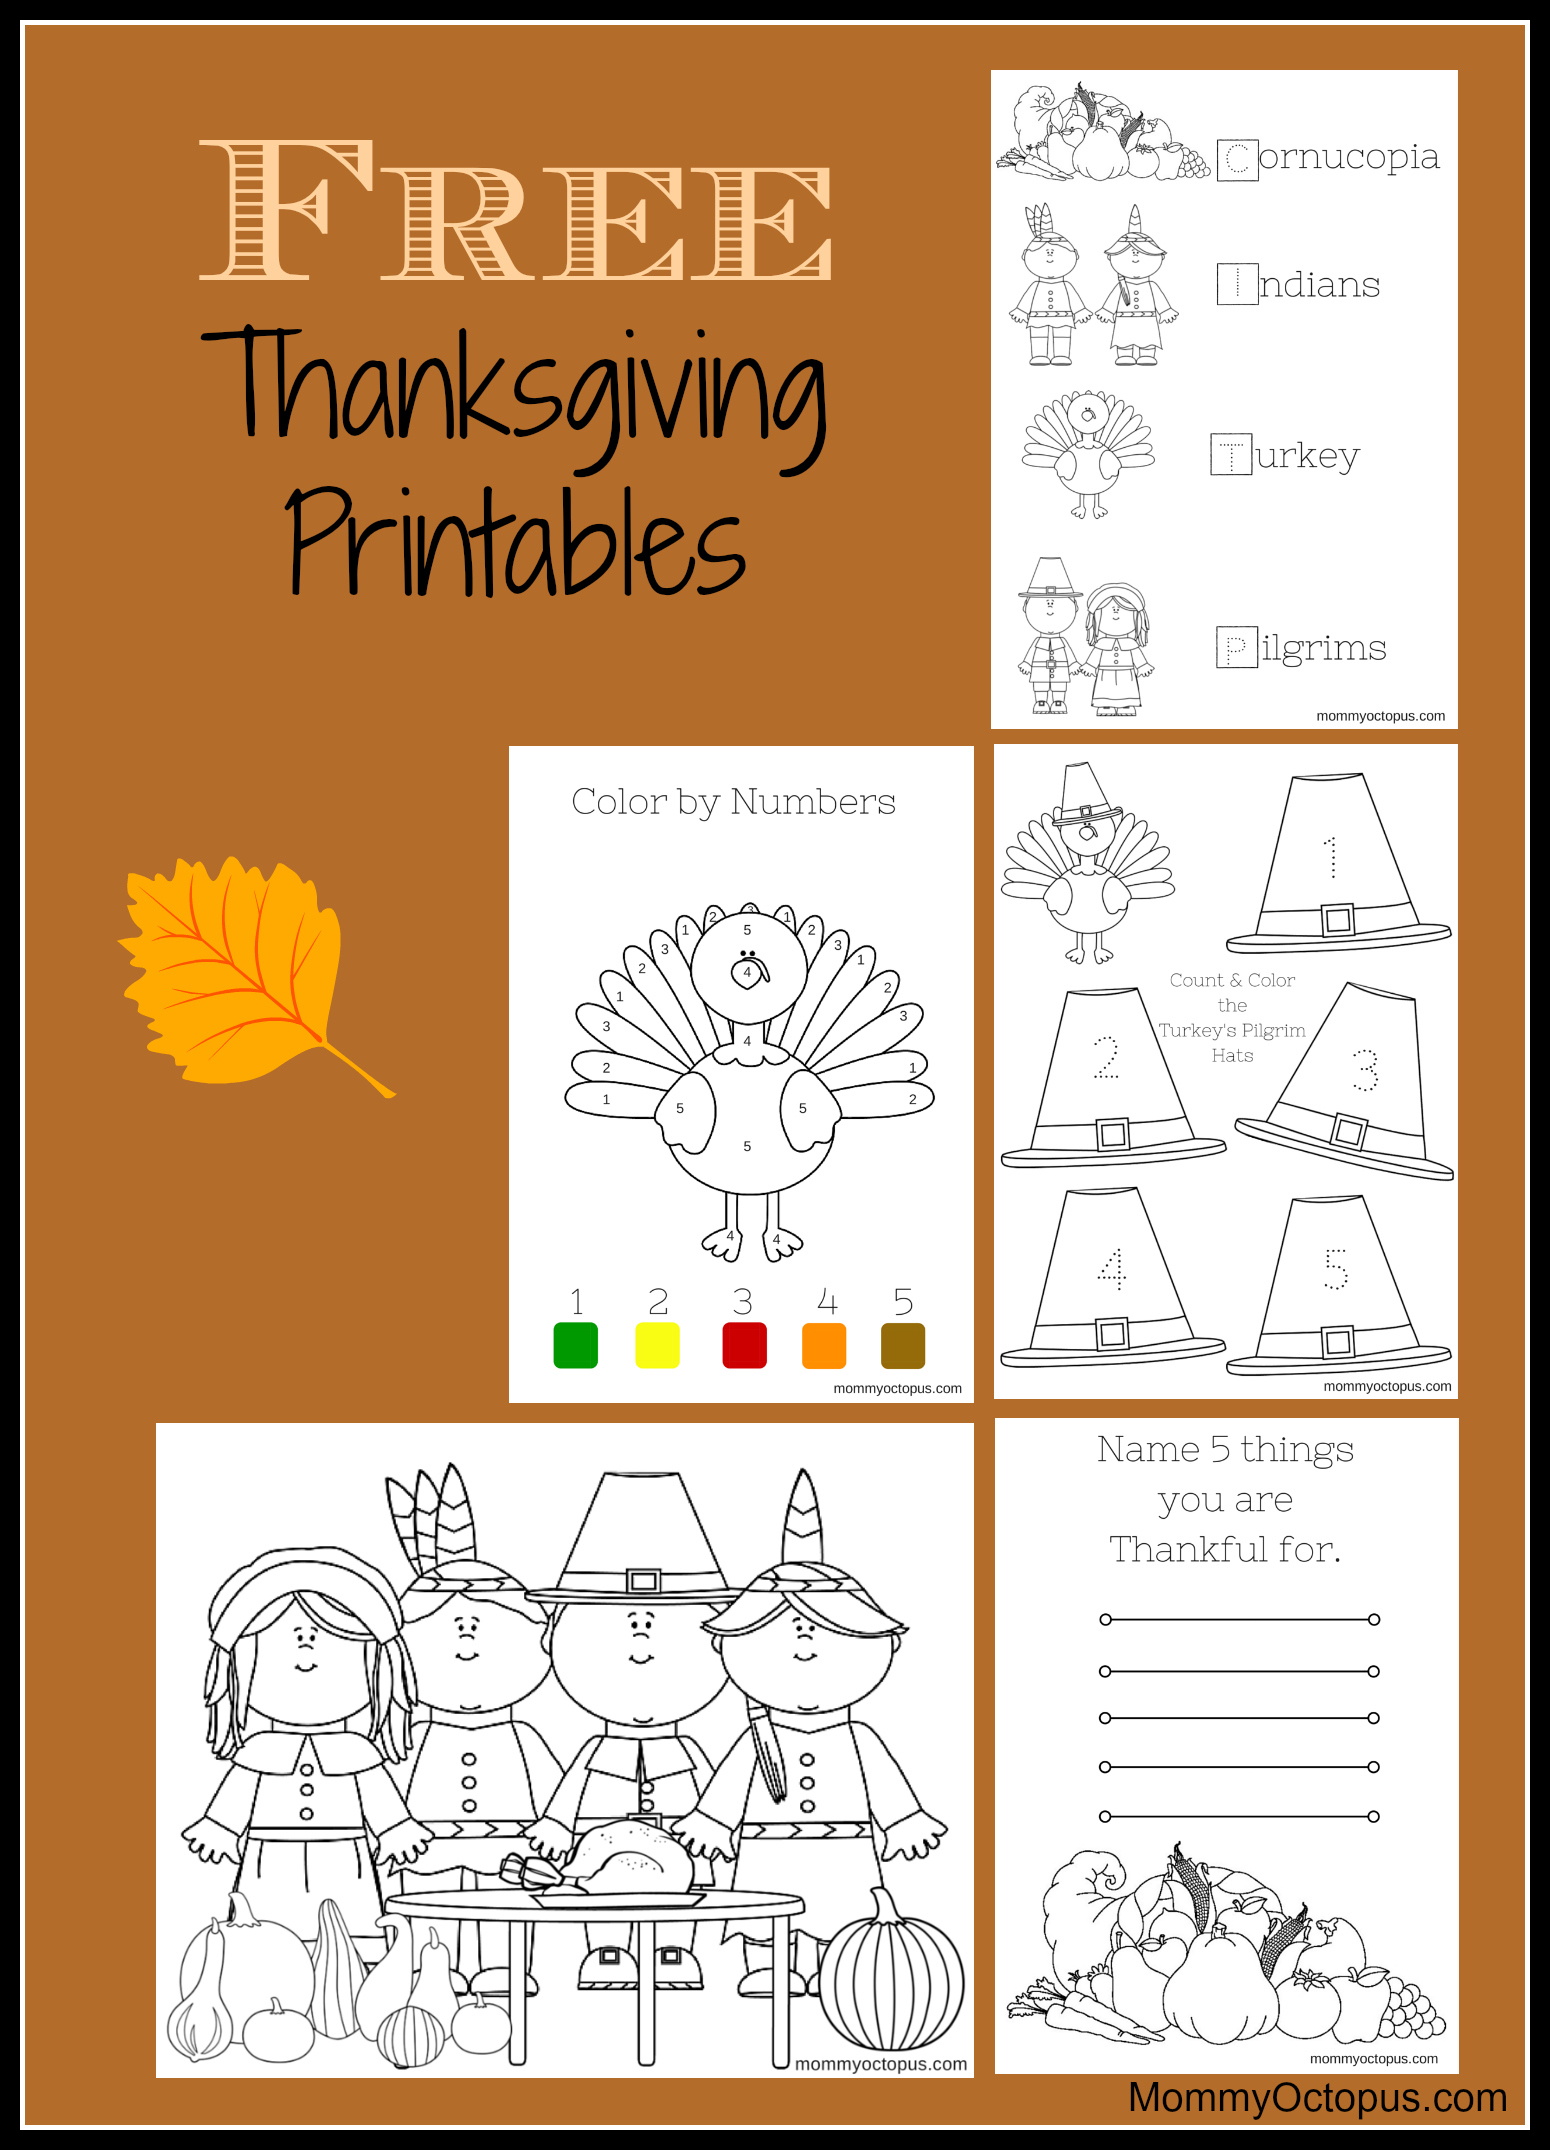 Free Thanksgiving Printable Activity Sheets! - Mommy Octopus - Free Printable Kindergarten Thanksgiving Activities